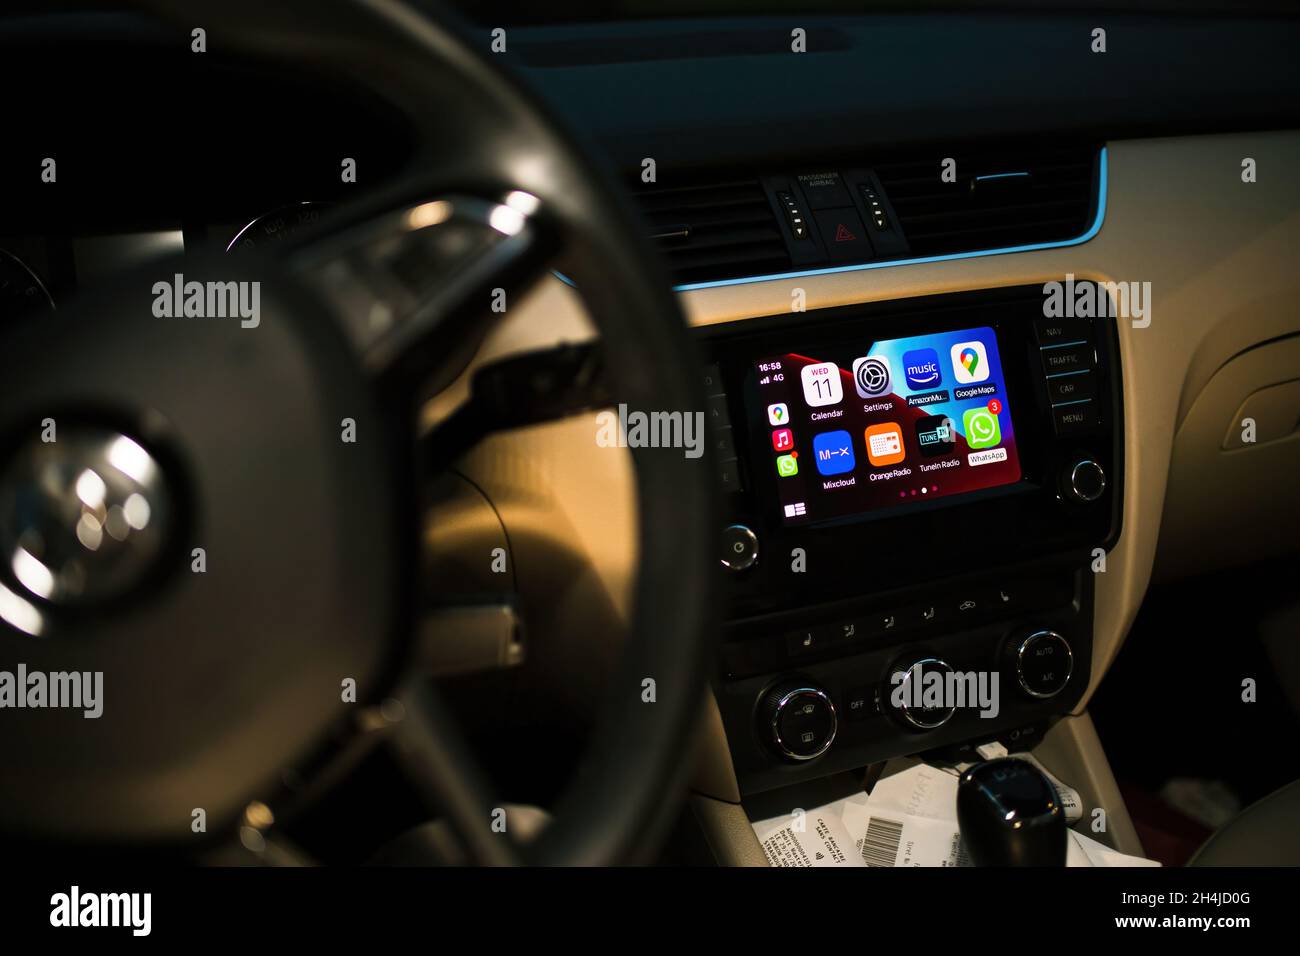 Luxury car interior at night with dashboard computer showing on display Apple CarPlay Stock Photo